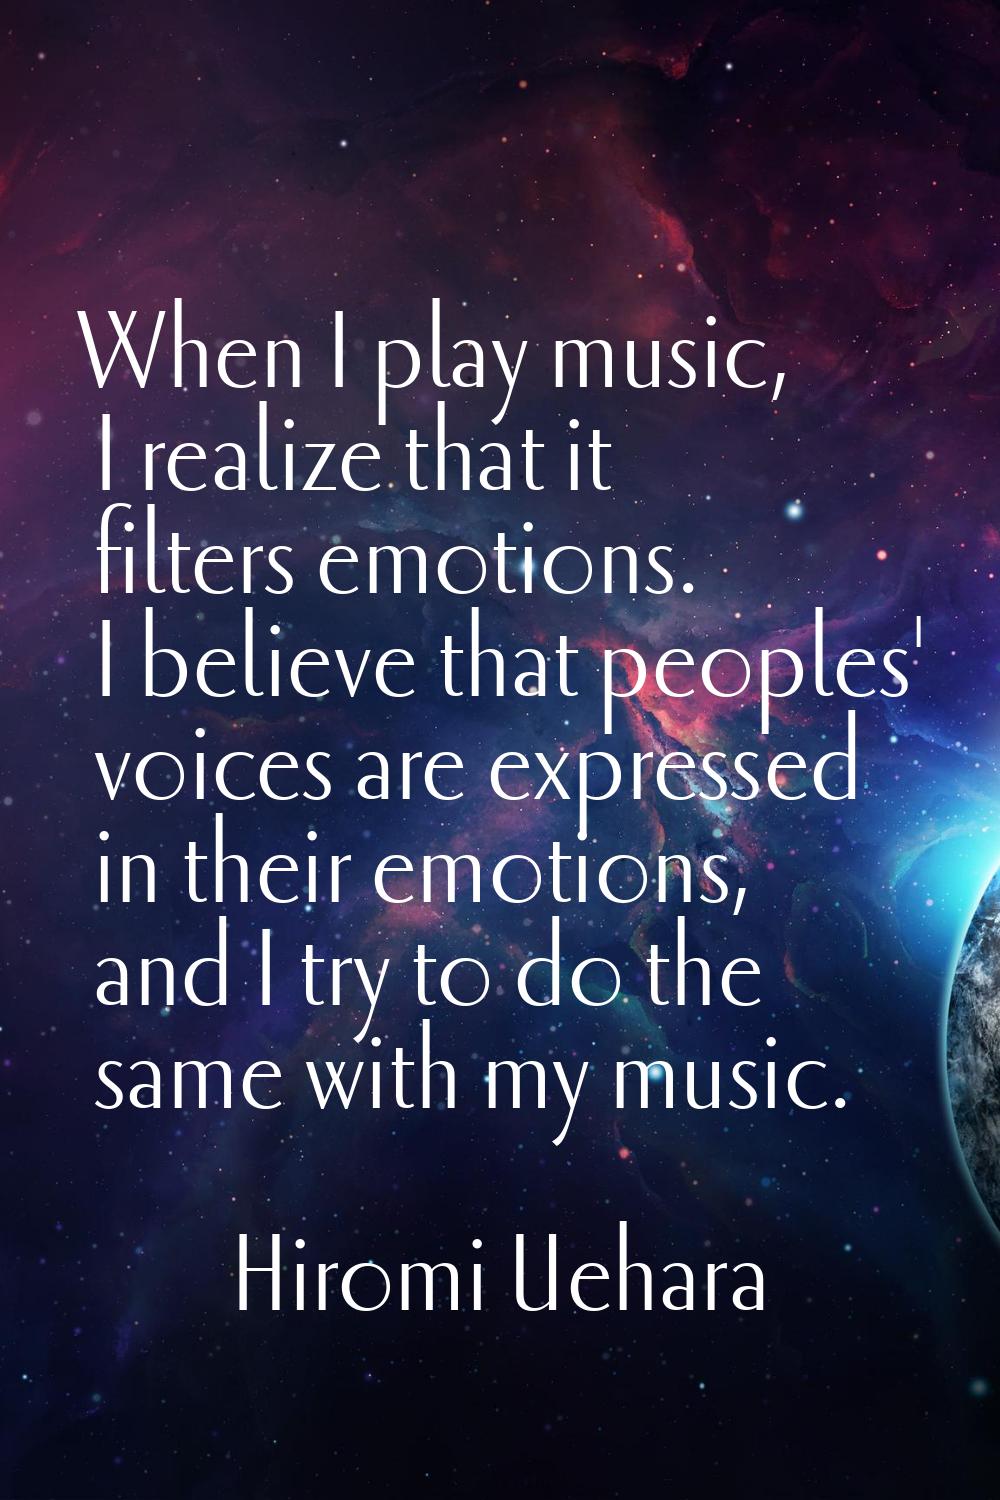 When I play music, I realize that it filters emotions. I believe that peoples' voices are expressed